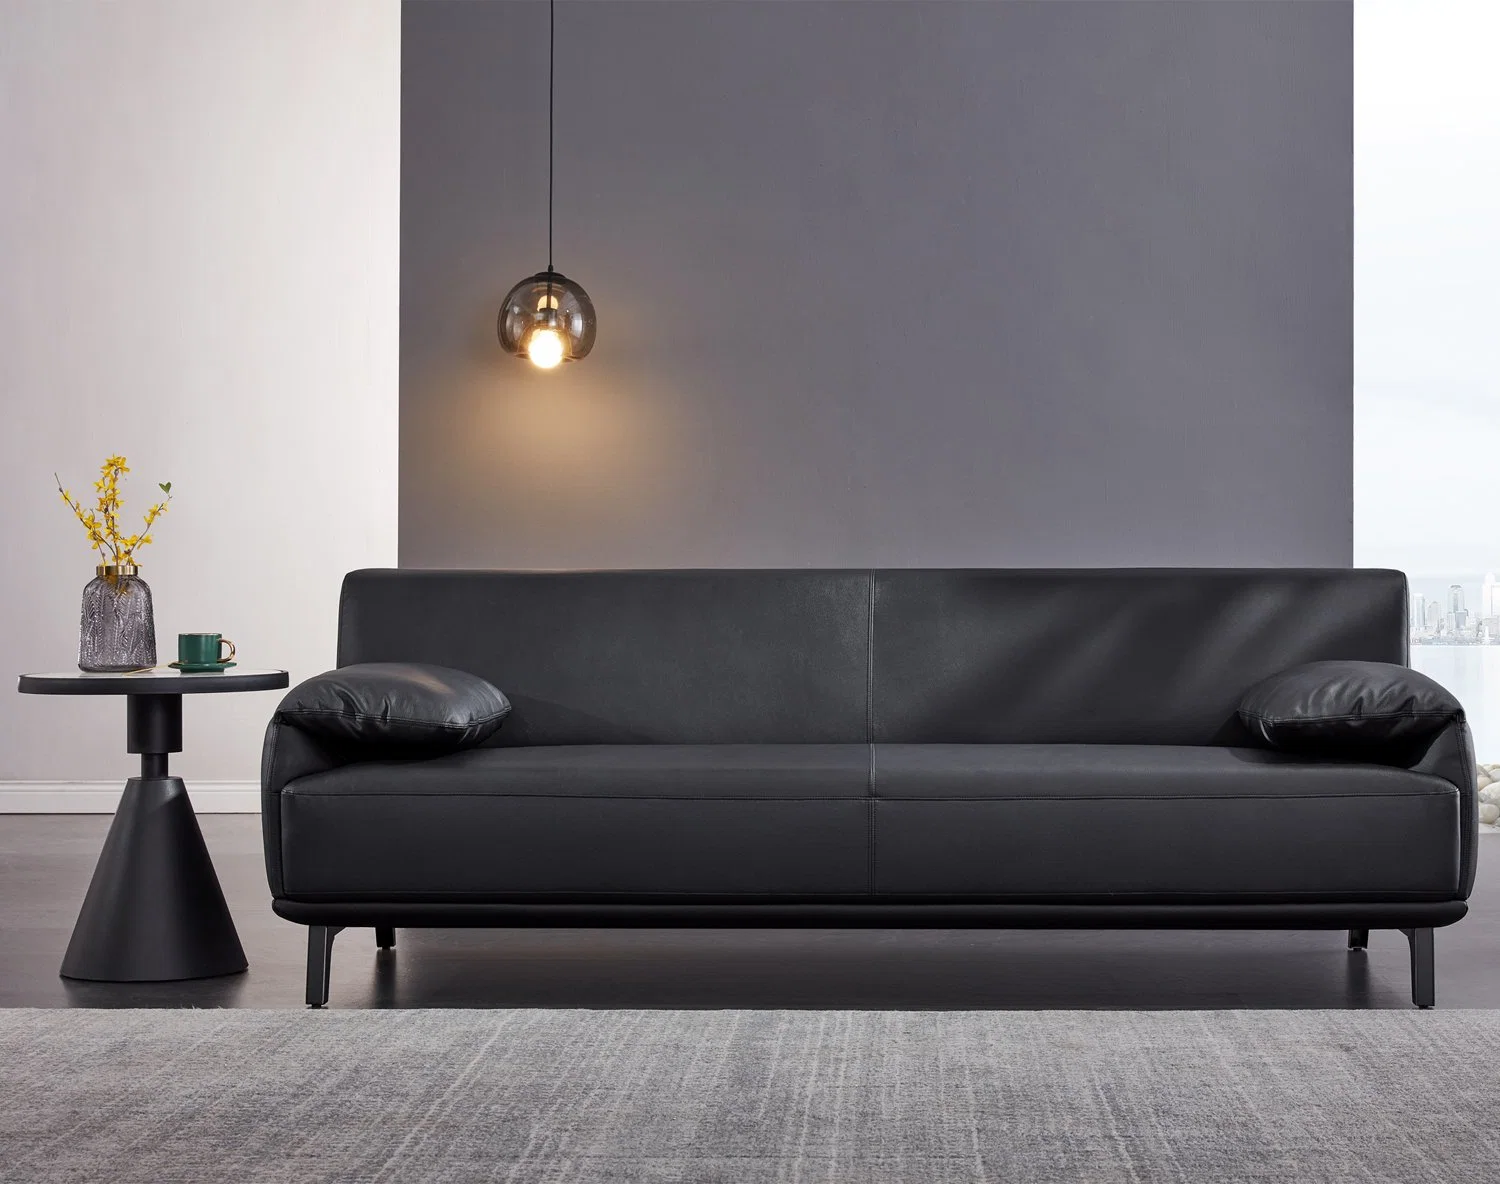 Modern Home/Living Room/Office Furniture 3 Seat Black Sofa Fabric Leisure Couch Singapore Leather Sofa